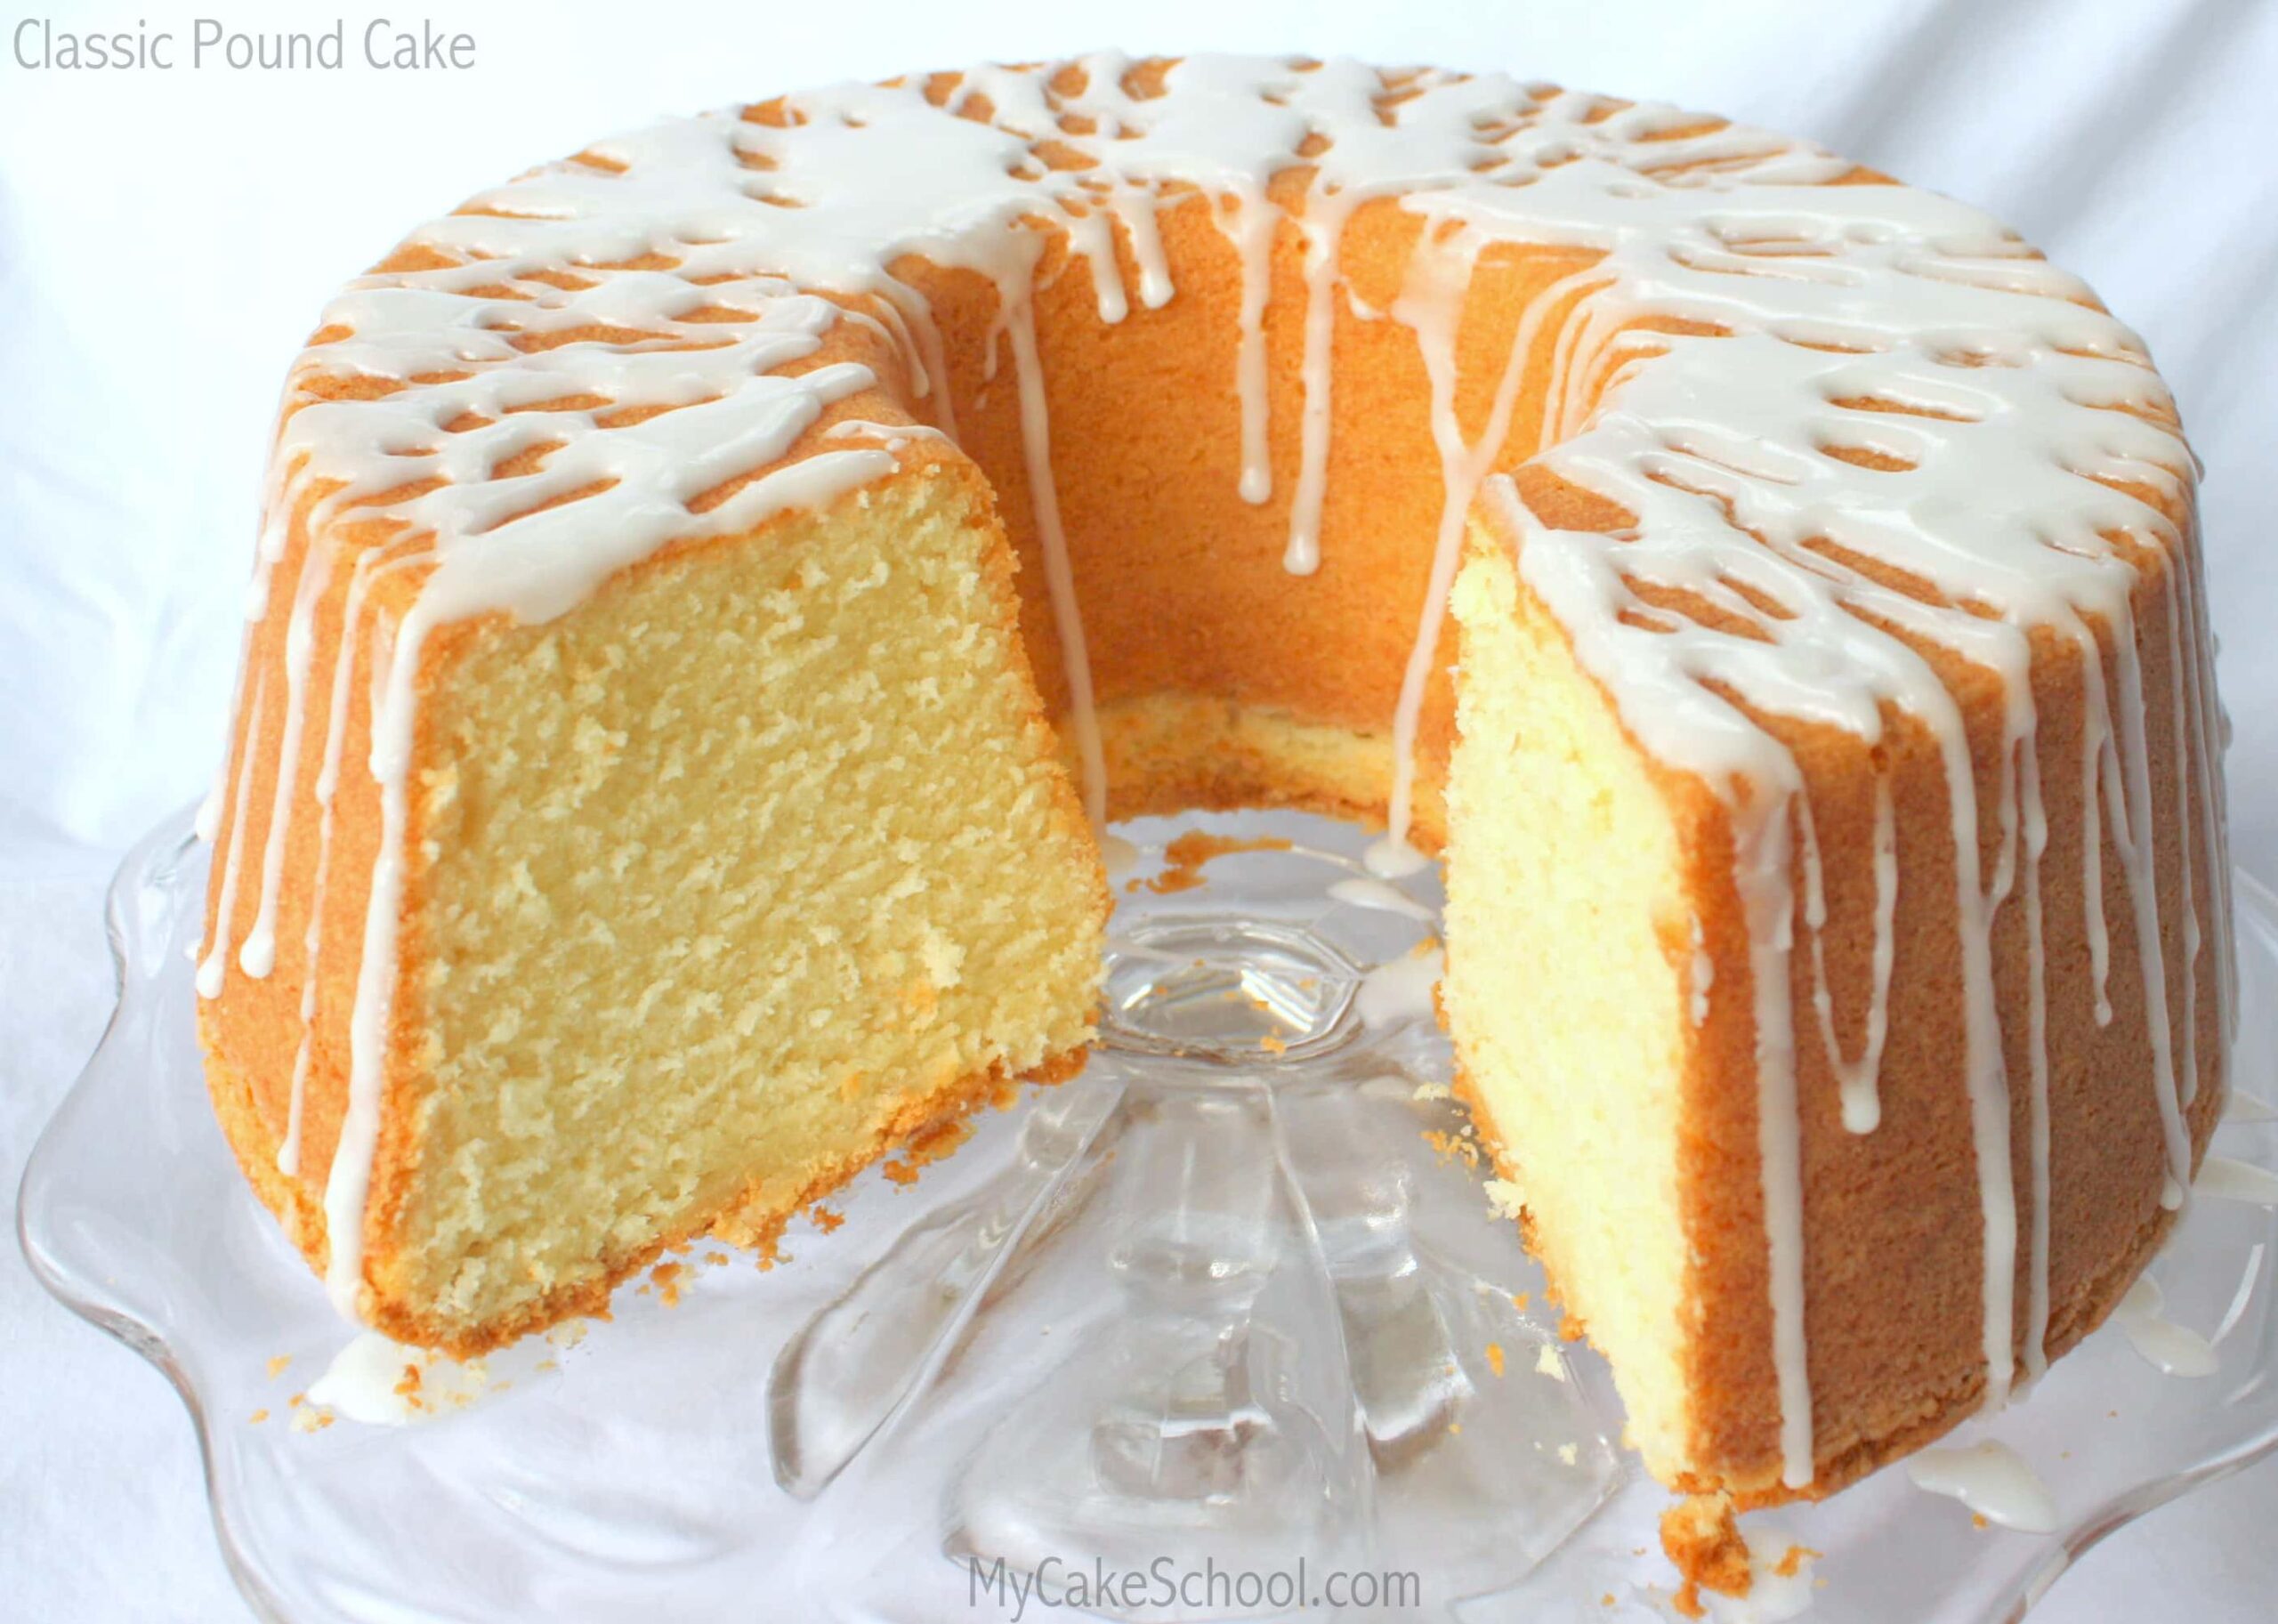  The sweet scent of freshly baked pound cake fills the room as you mix together the batter.